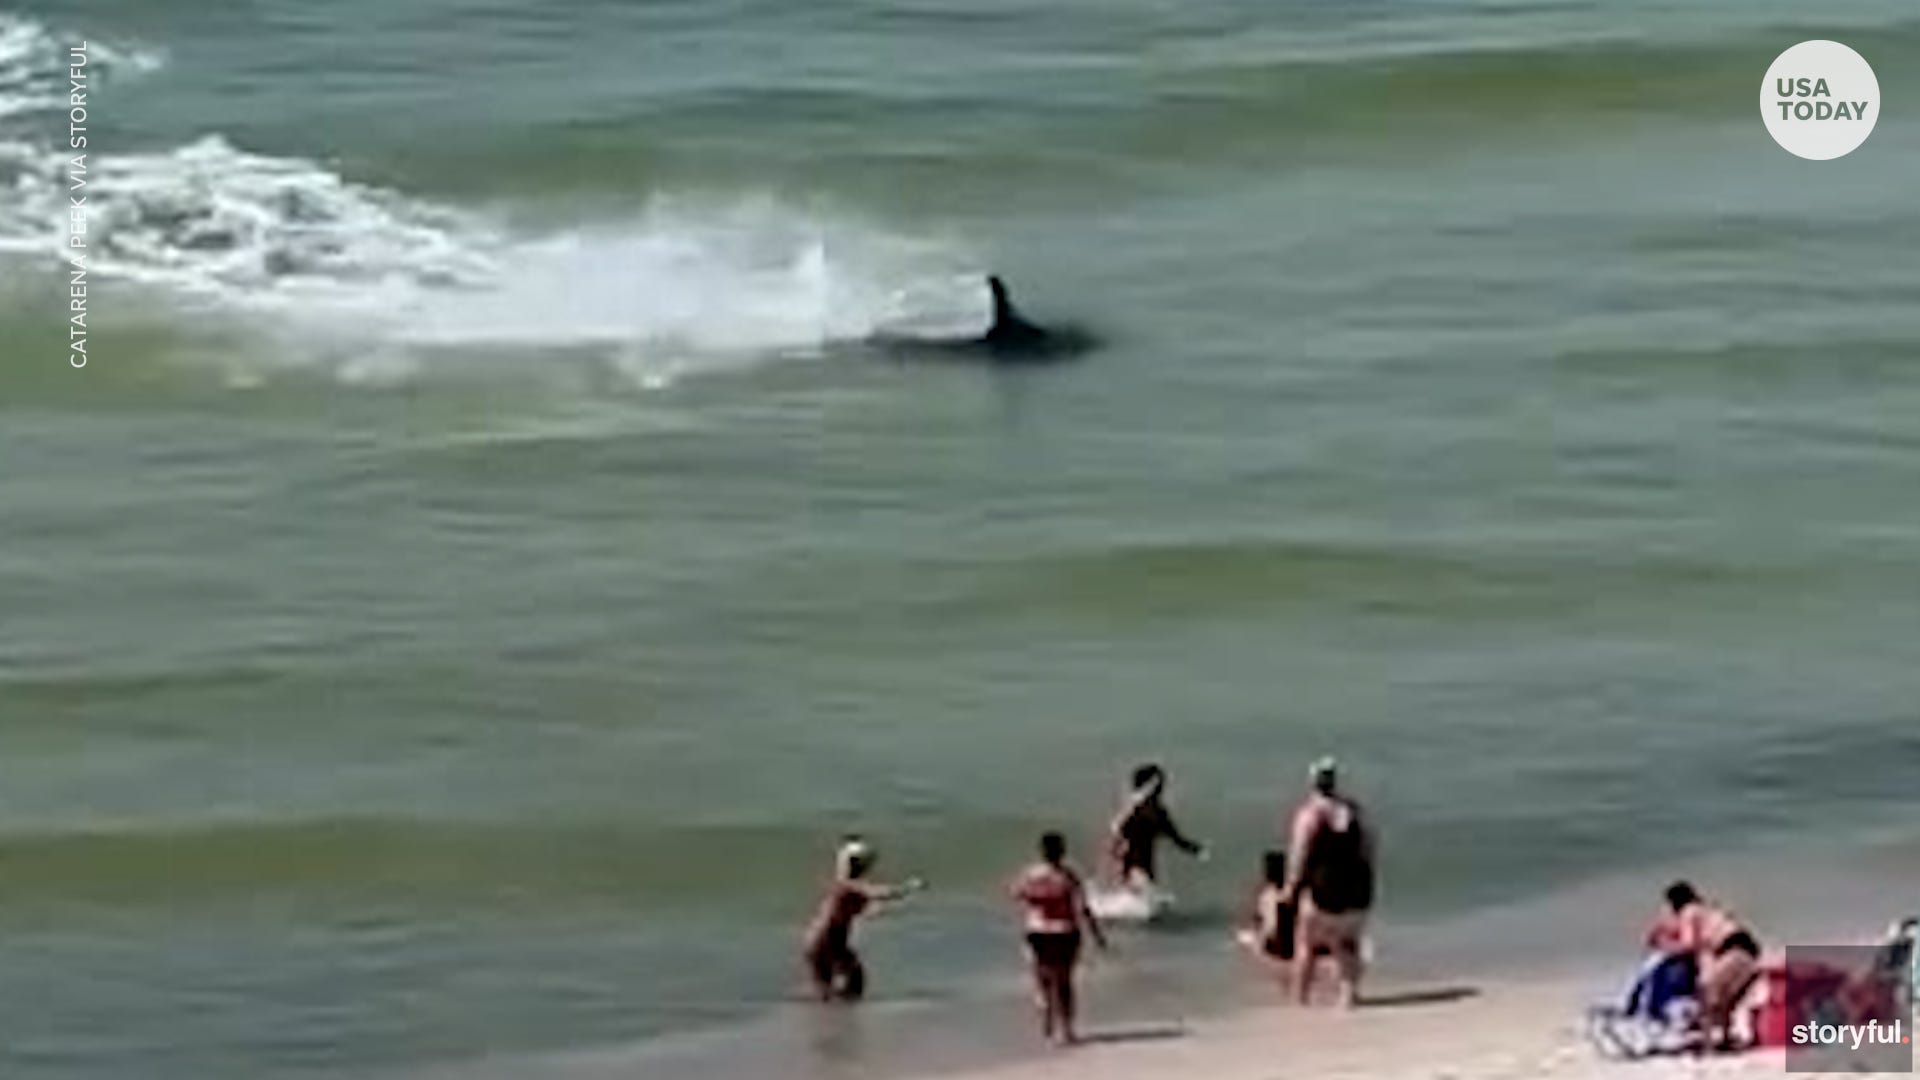 Uptick in East Coast shark sightings has lifeguards on alert and experts searching for answers